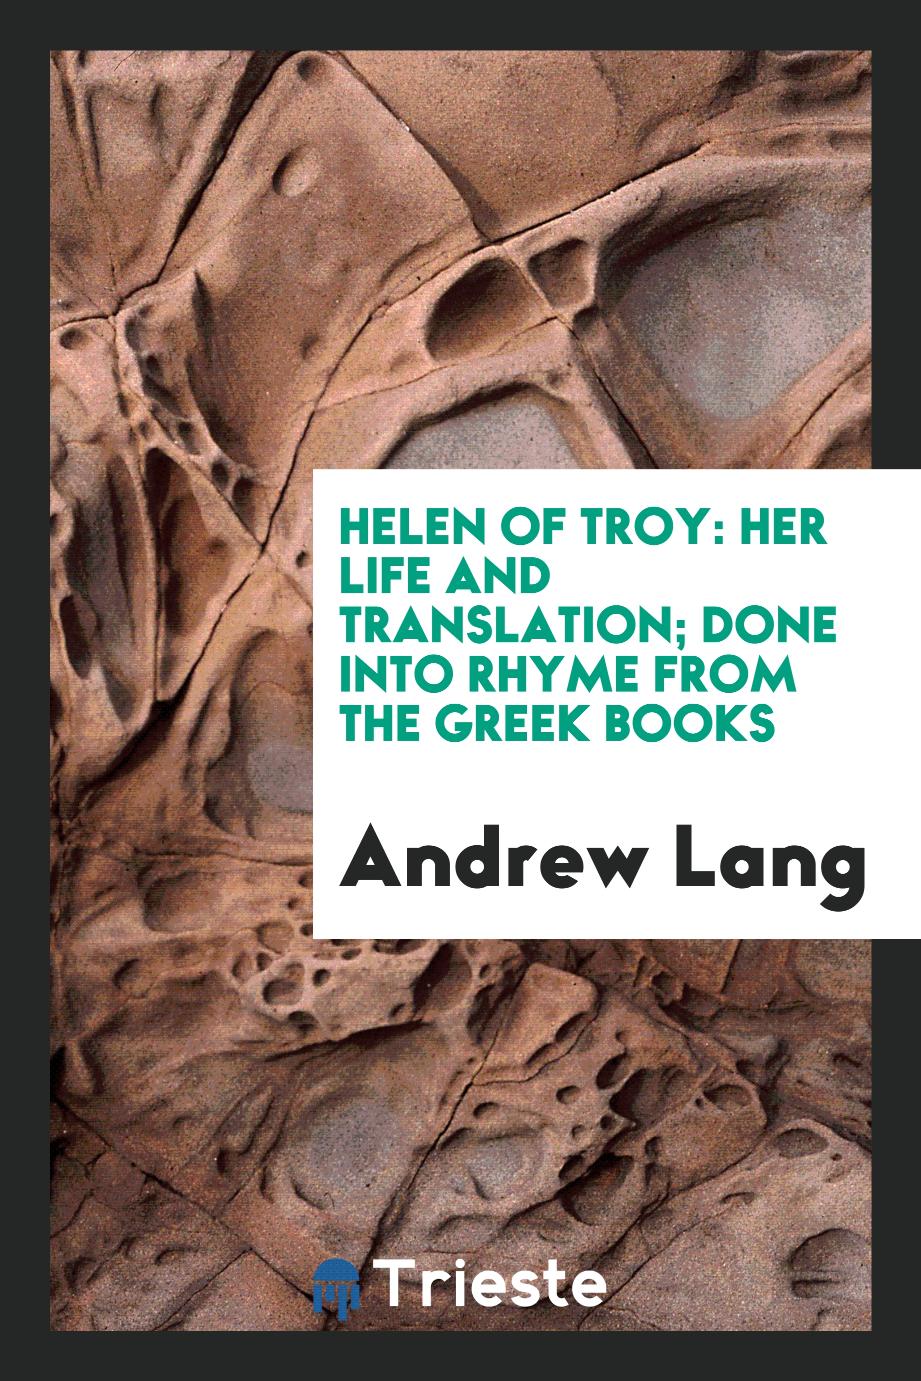 Helen of Troy: her life and translation; done into rhyme from the Greek books